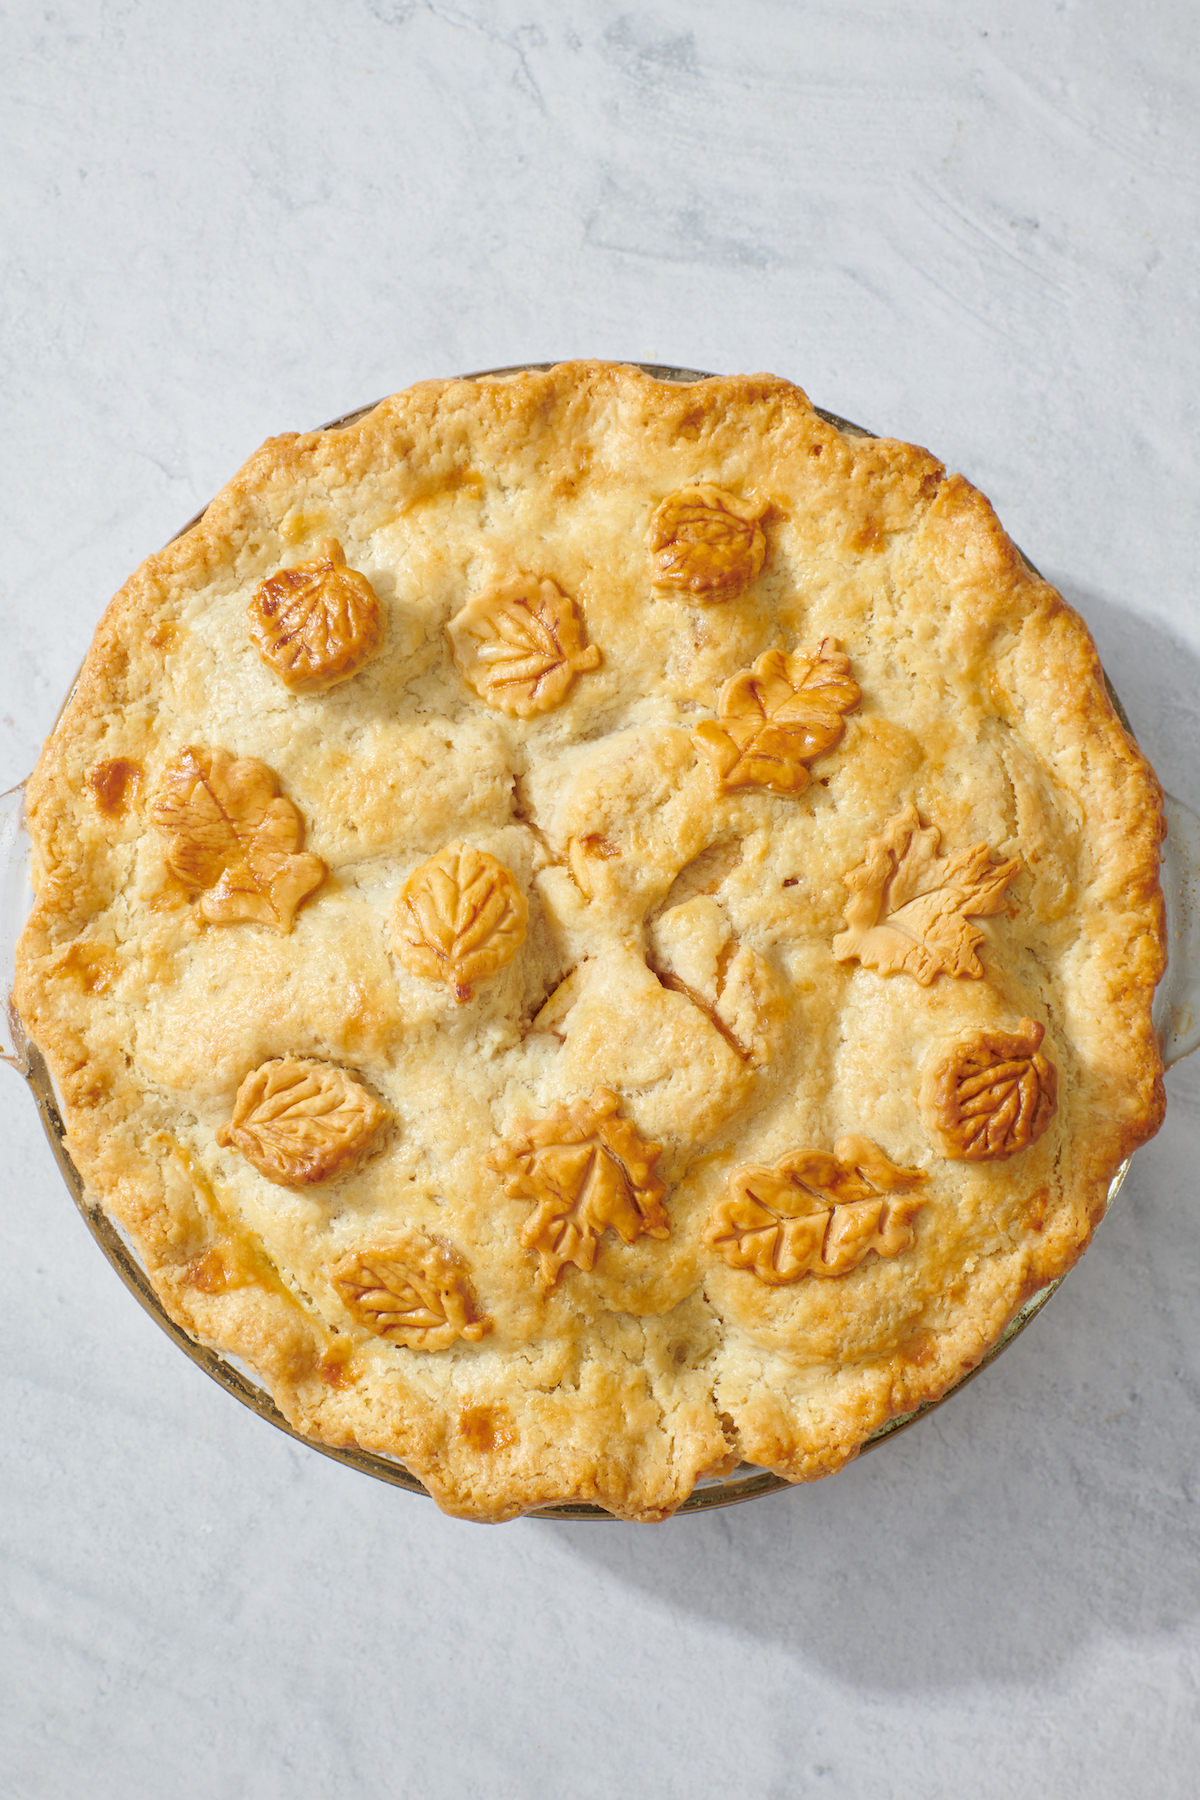 Baked apple pie with leave cutouts for decoration.